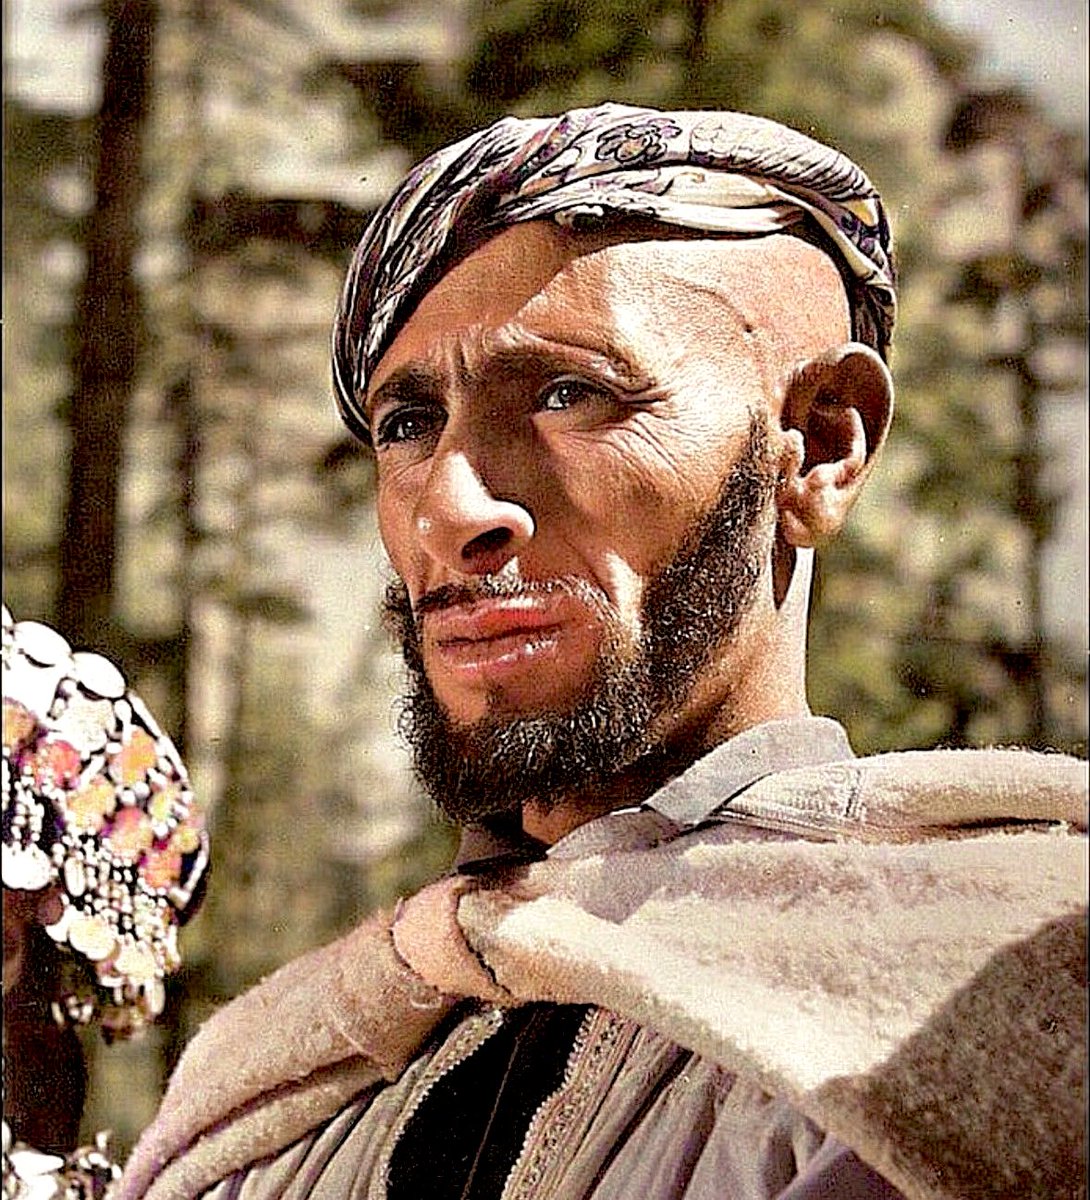 Moroccan man 🇲🇦 from the High Atlas, 1955